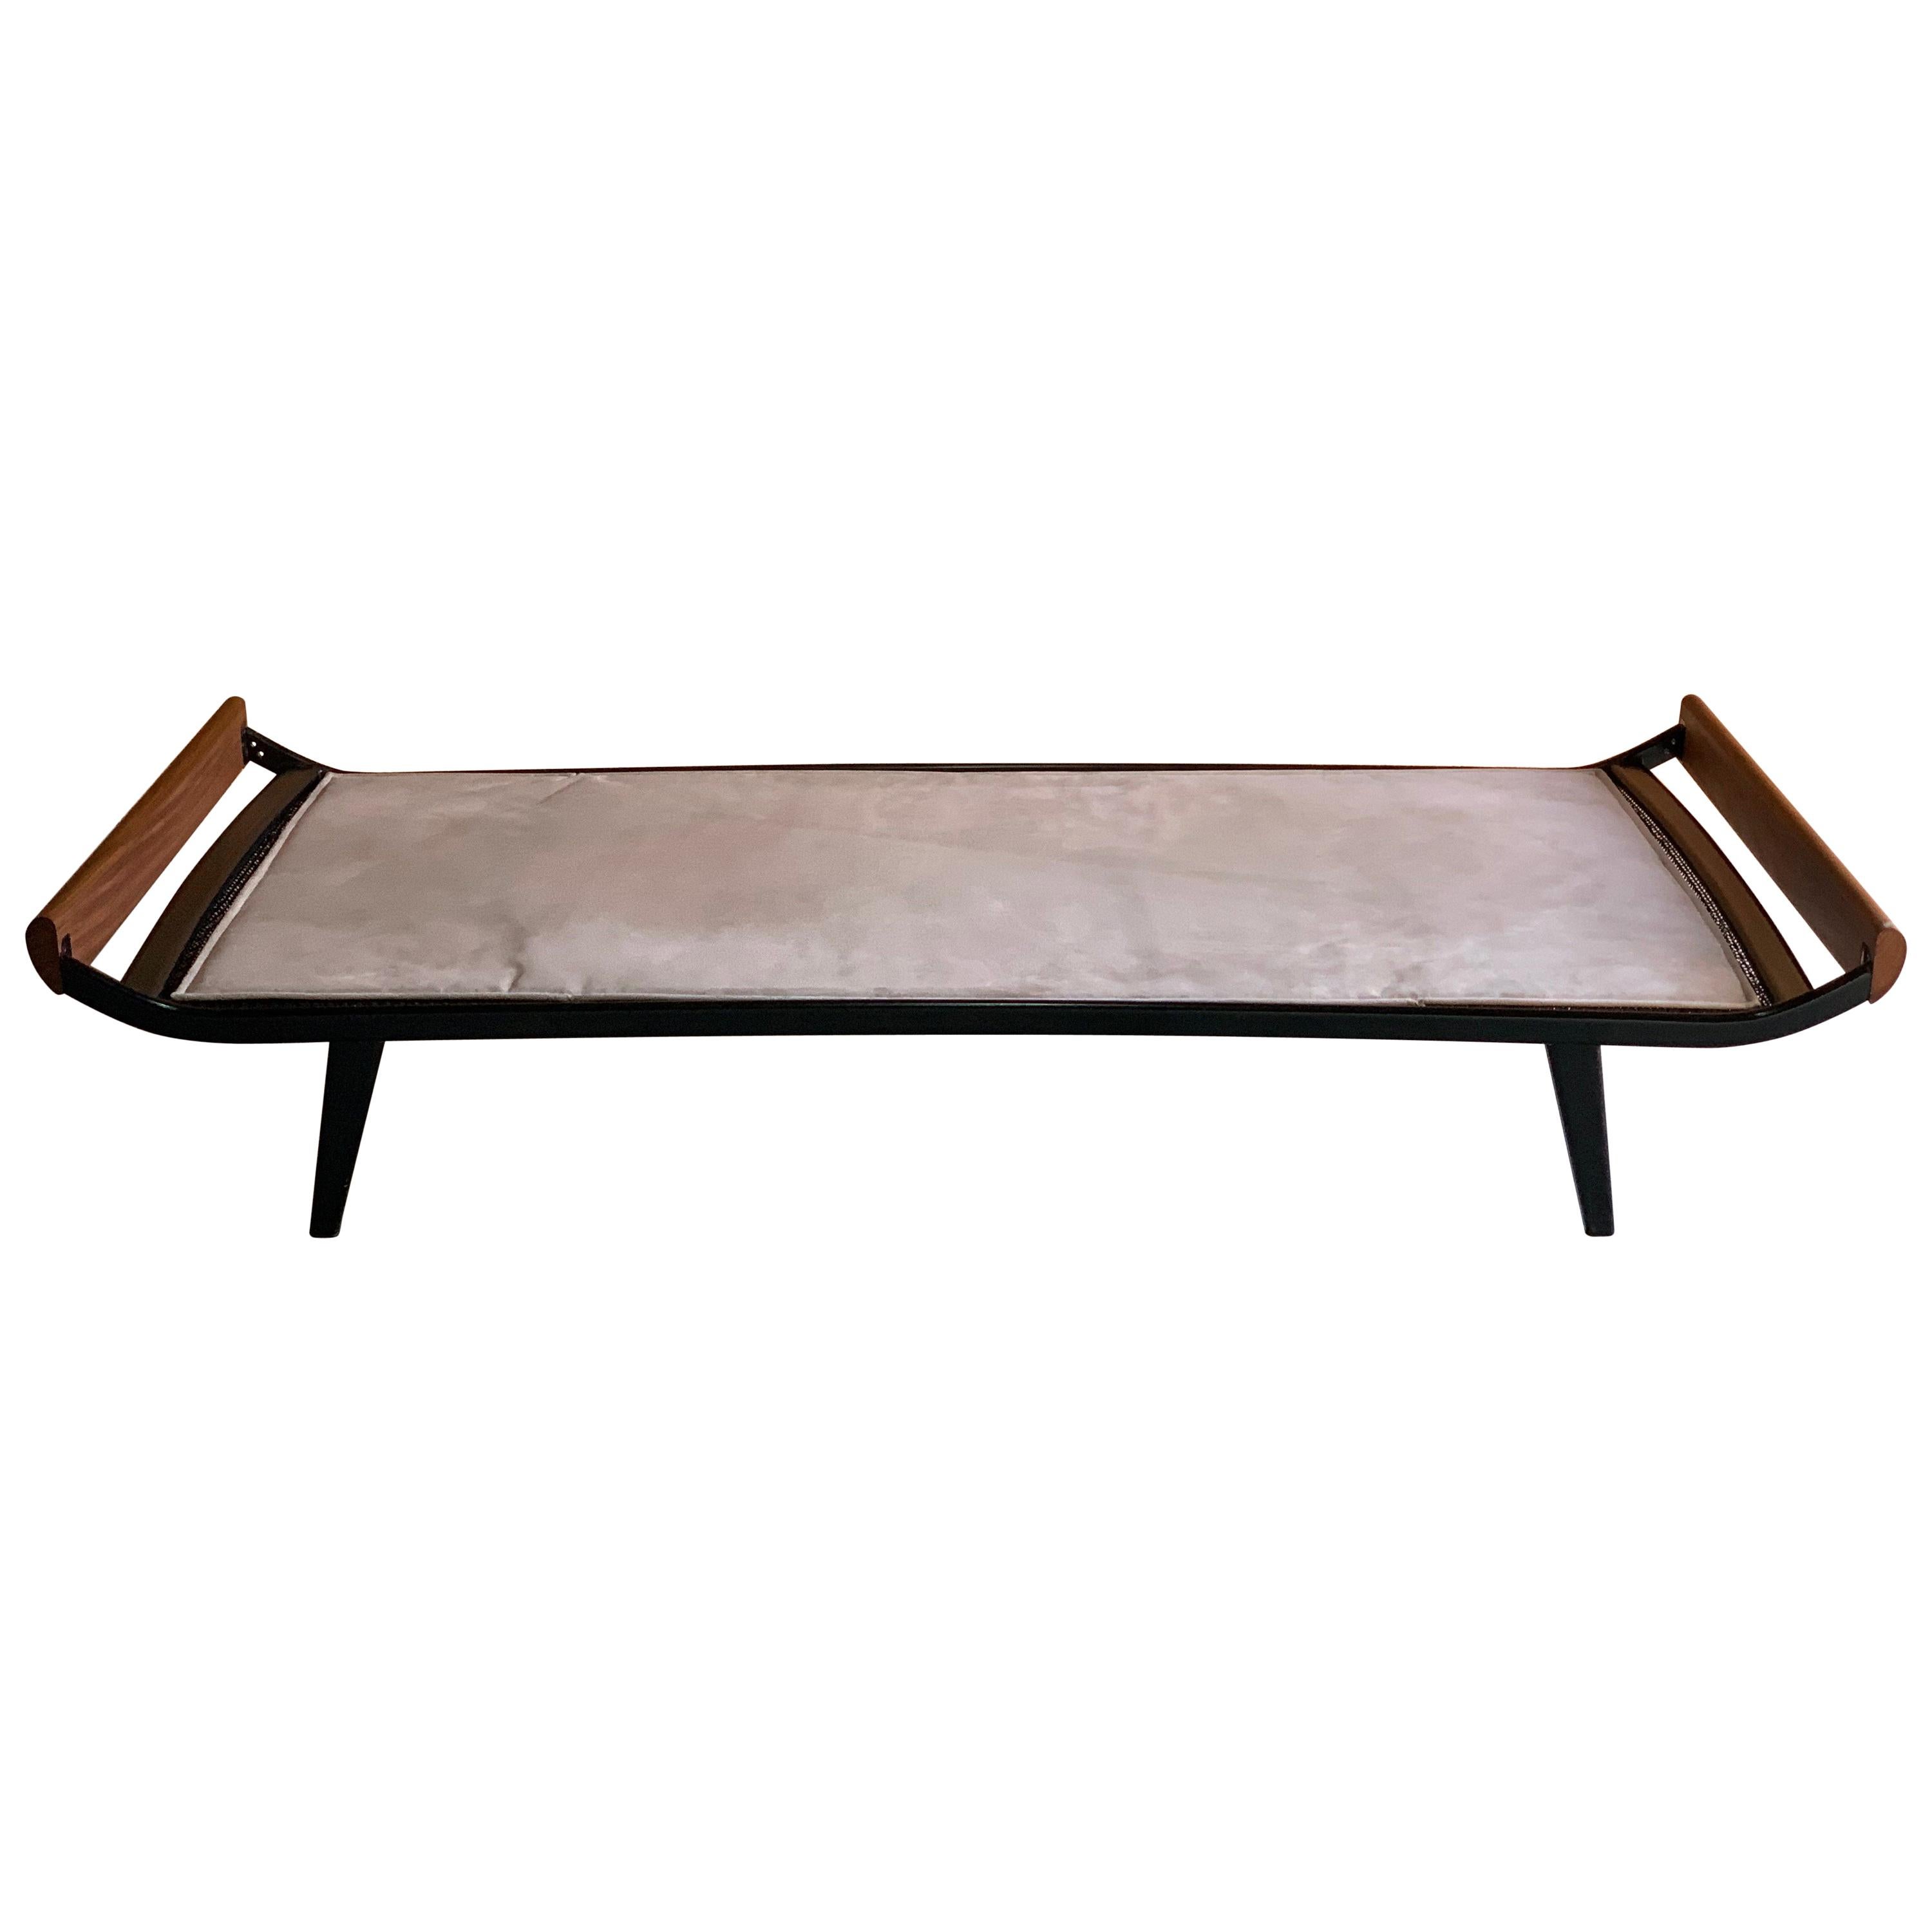 Cleopatra daybed by Dick Cordemeijer for Auping 1950s design.

Dick Cordemeijer for Auping ‘Cleopatra’ Teak daybed designed in1950, the Teak ends with black metal bed frame, the cream ultra suede mattress resting over a mattress topper on sprung